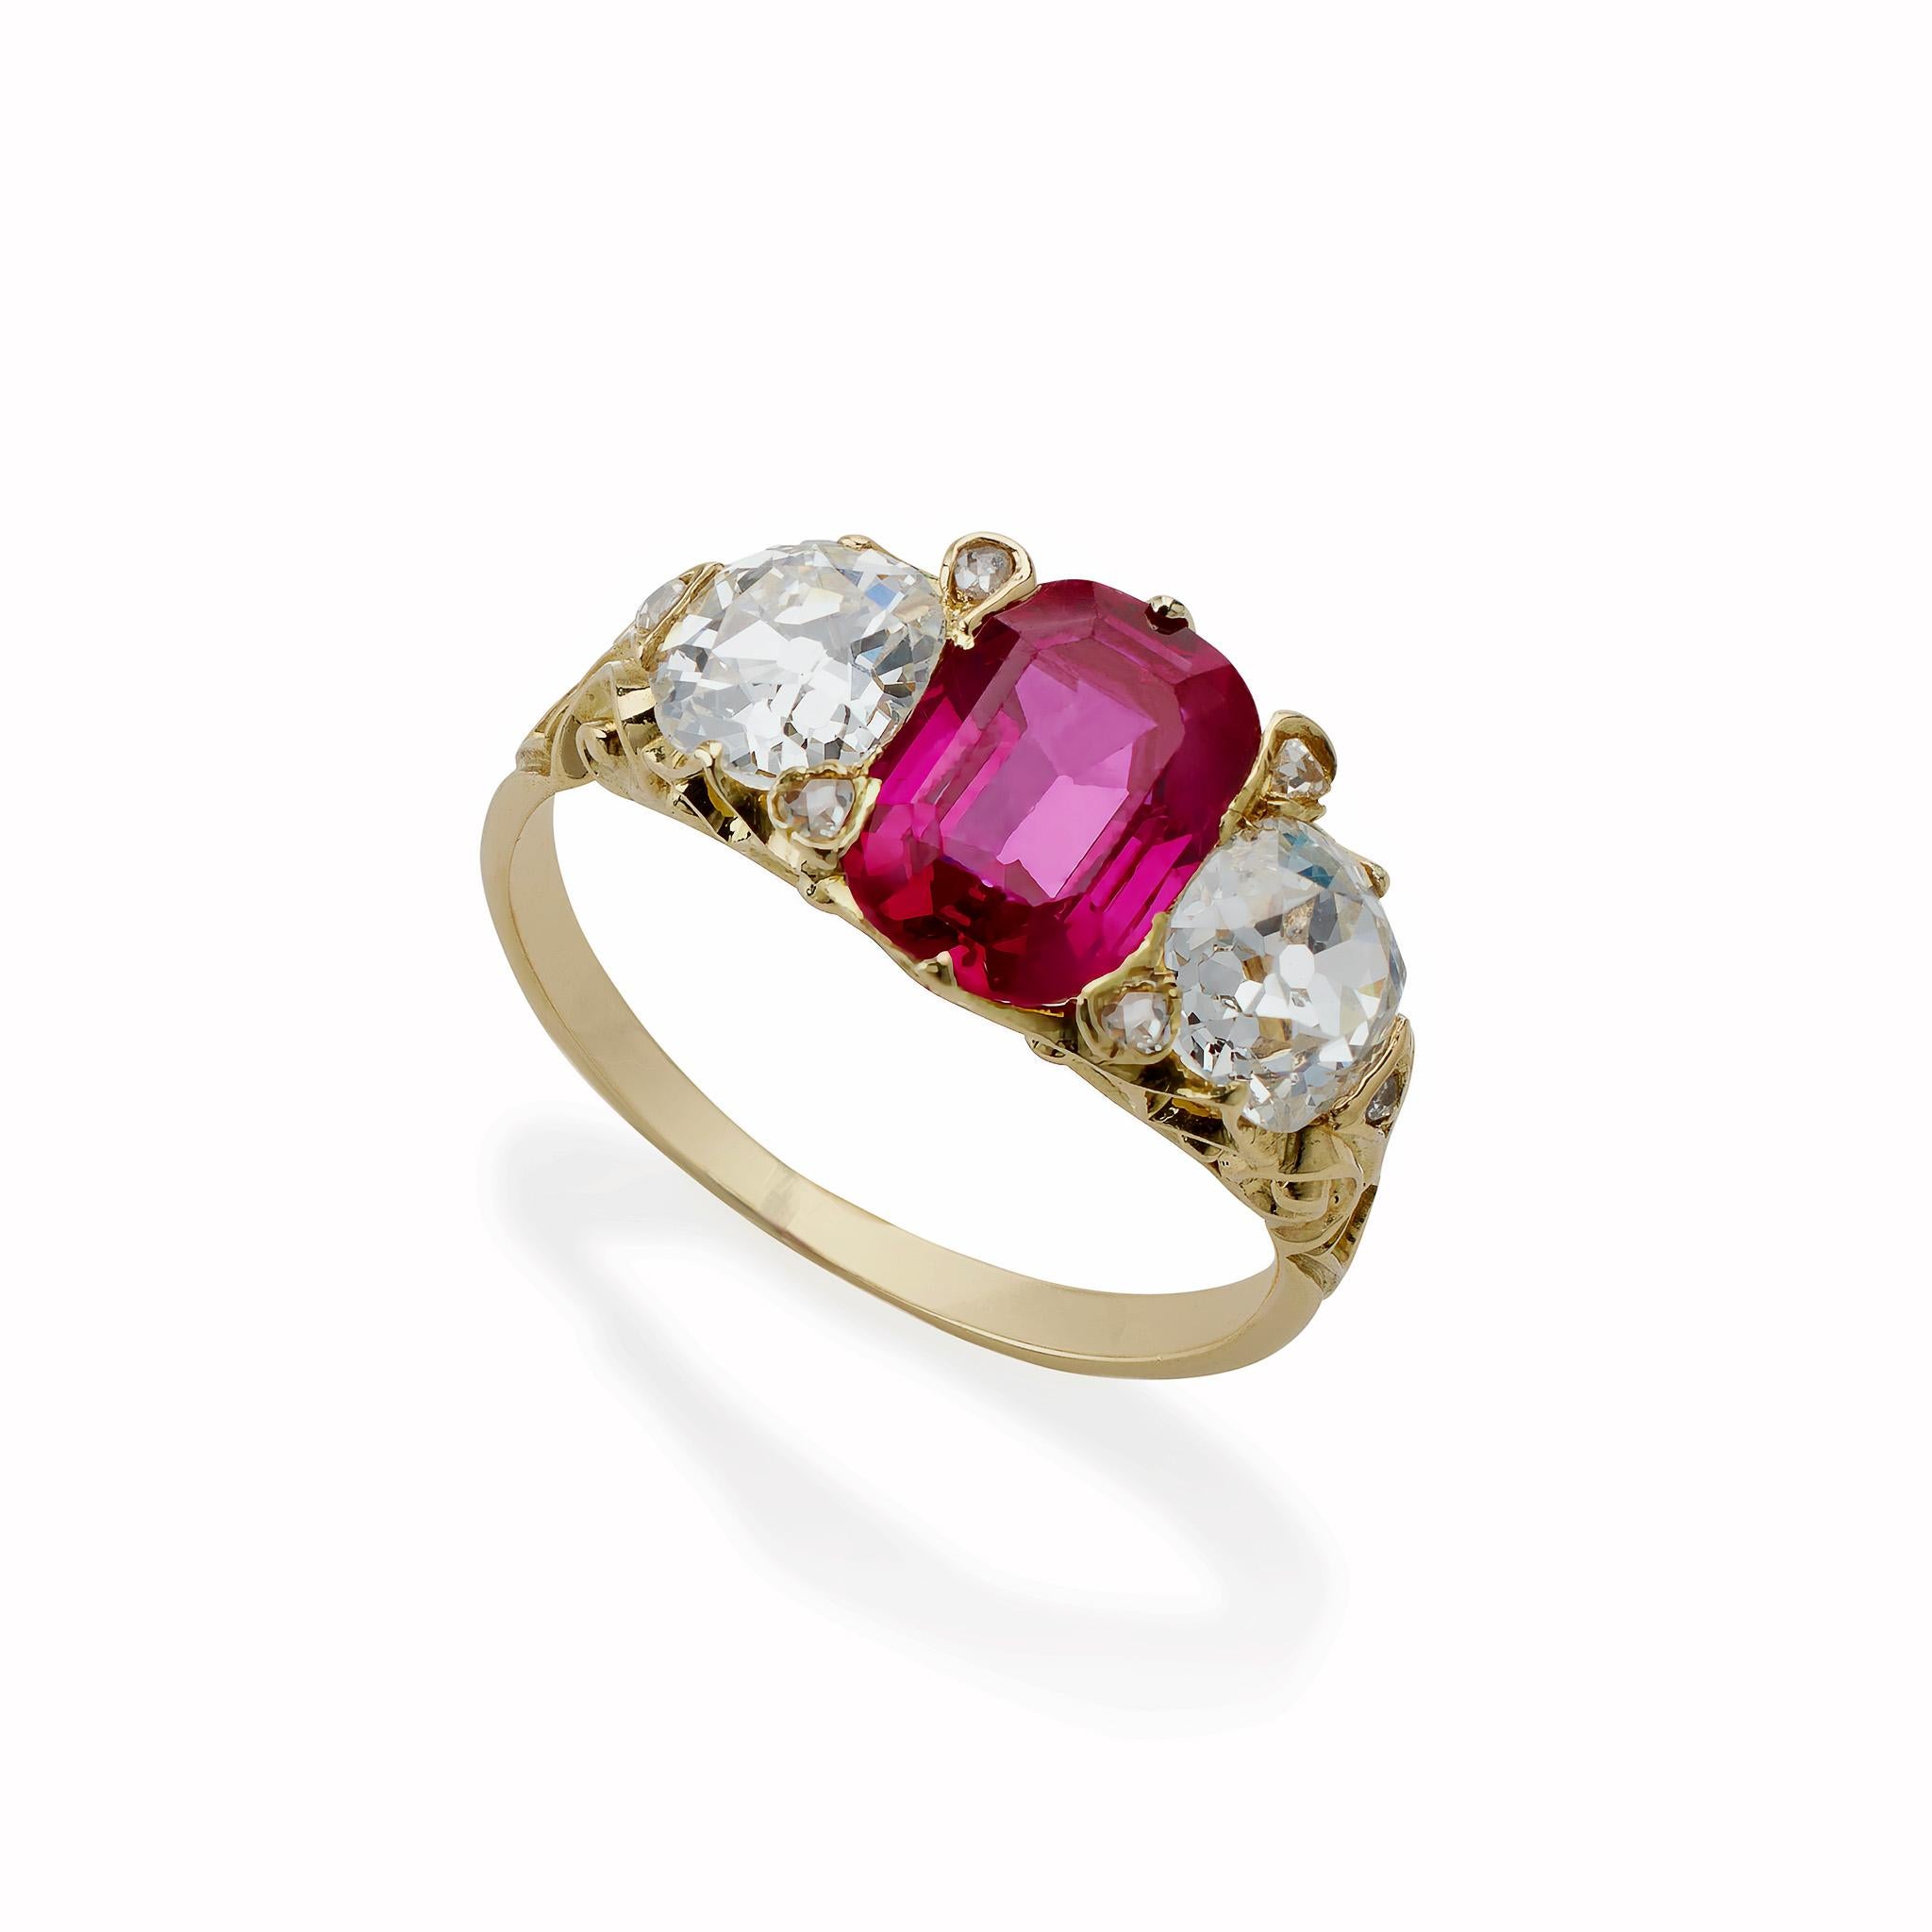 Mounted in the 1890s, this Burmese ruby is set in 18K gold with antique-cut diamonds. The rectangular step-cut ruby with rounded corners, measuring approximately 9.30 x 6.00 x 3.40 mm, weighing approximately 1.90 carats, is flanked by 2 old mine-cut